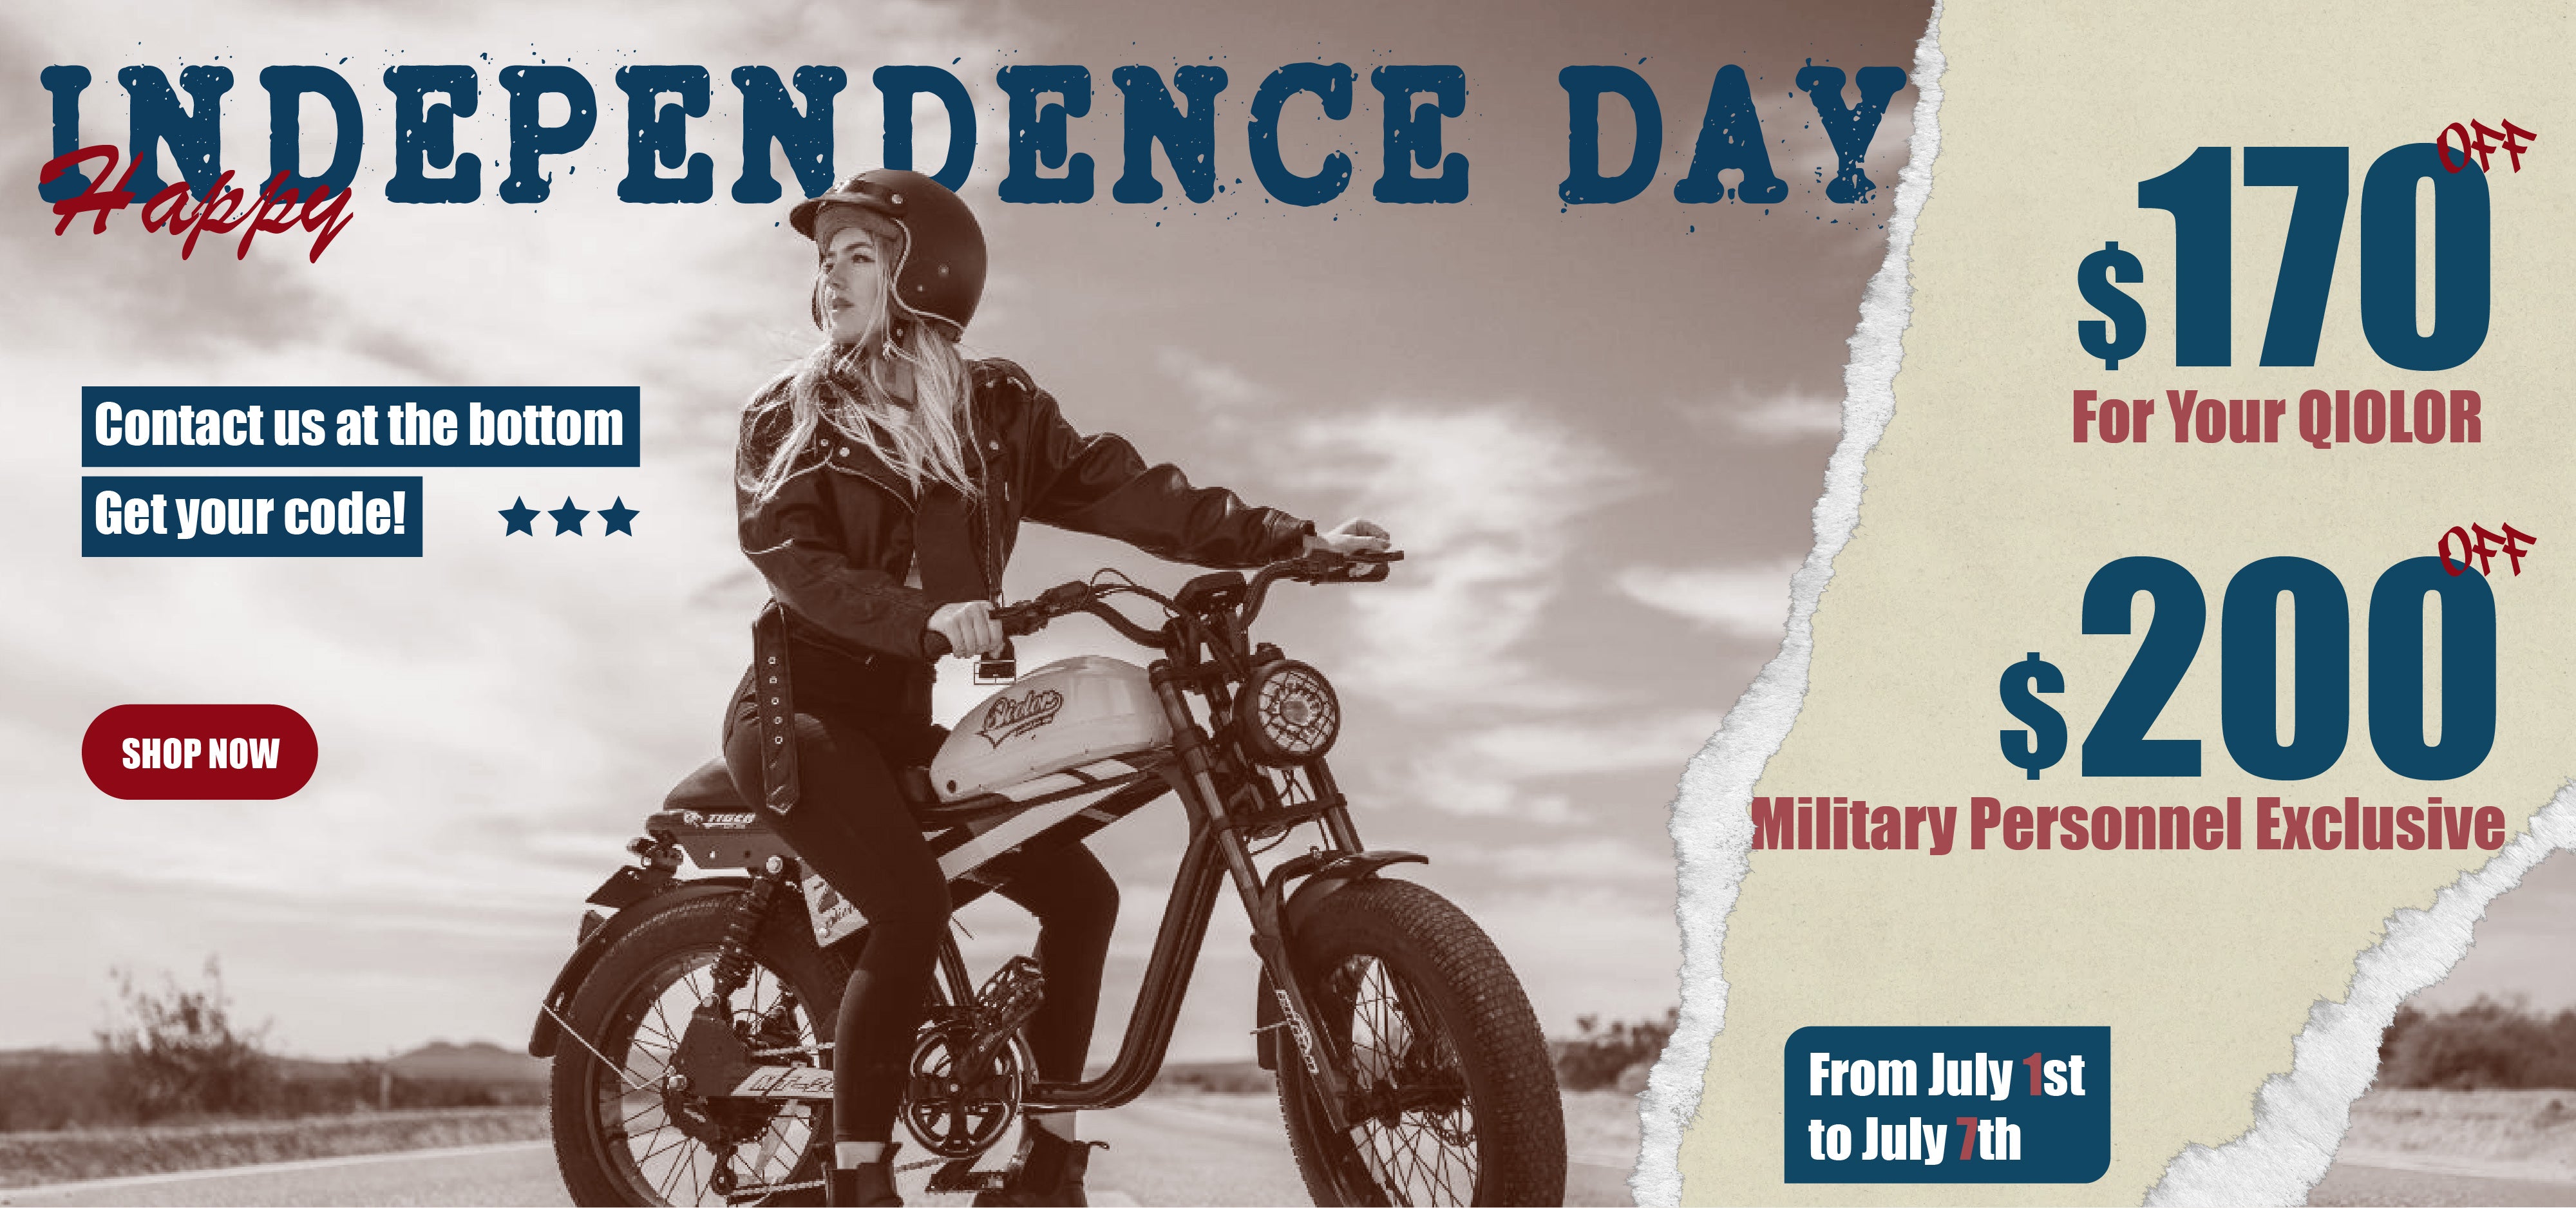 Celebrate Freedom This 4th of July with Electric Bike!